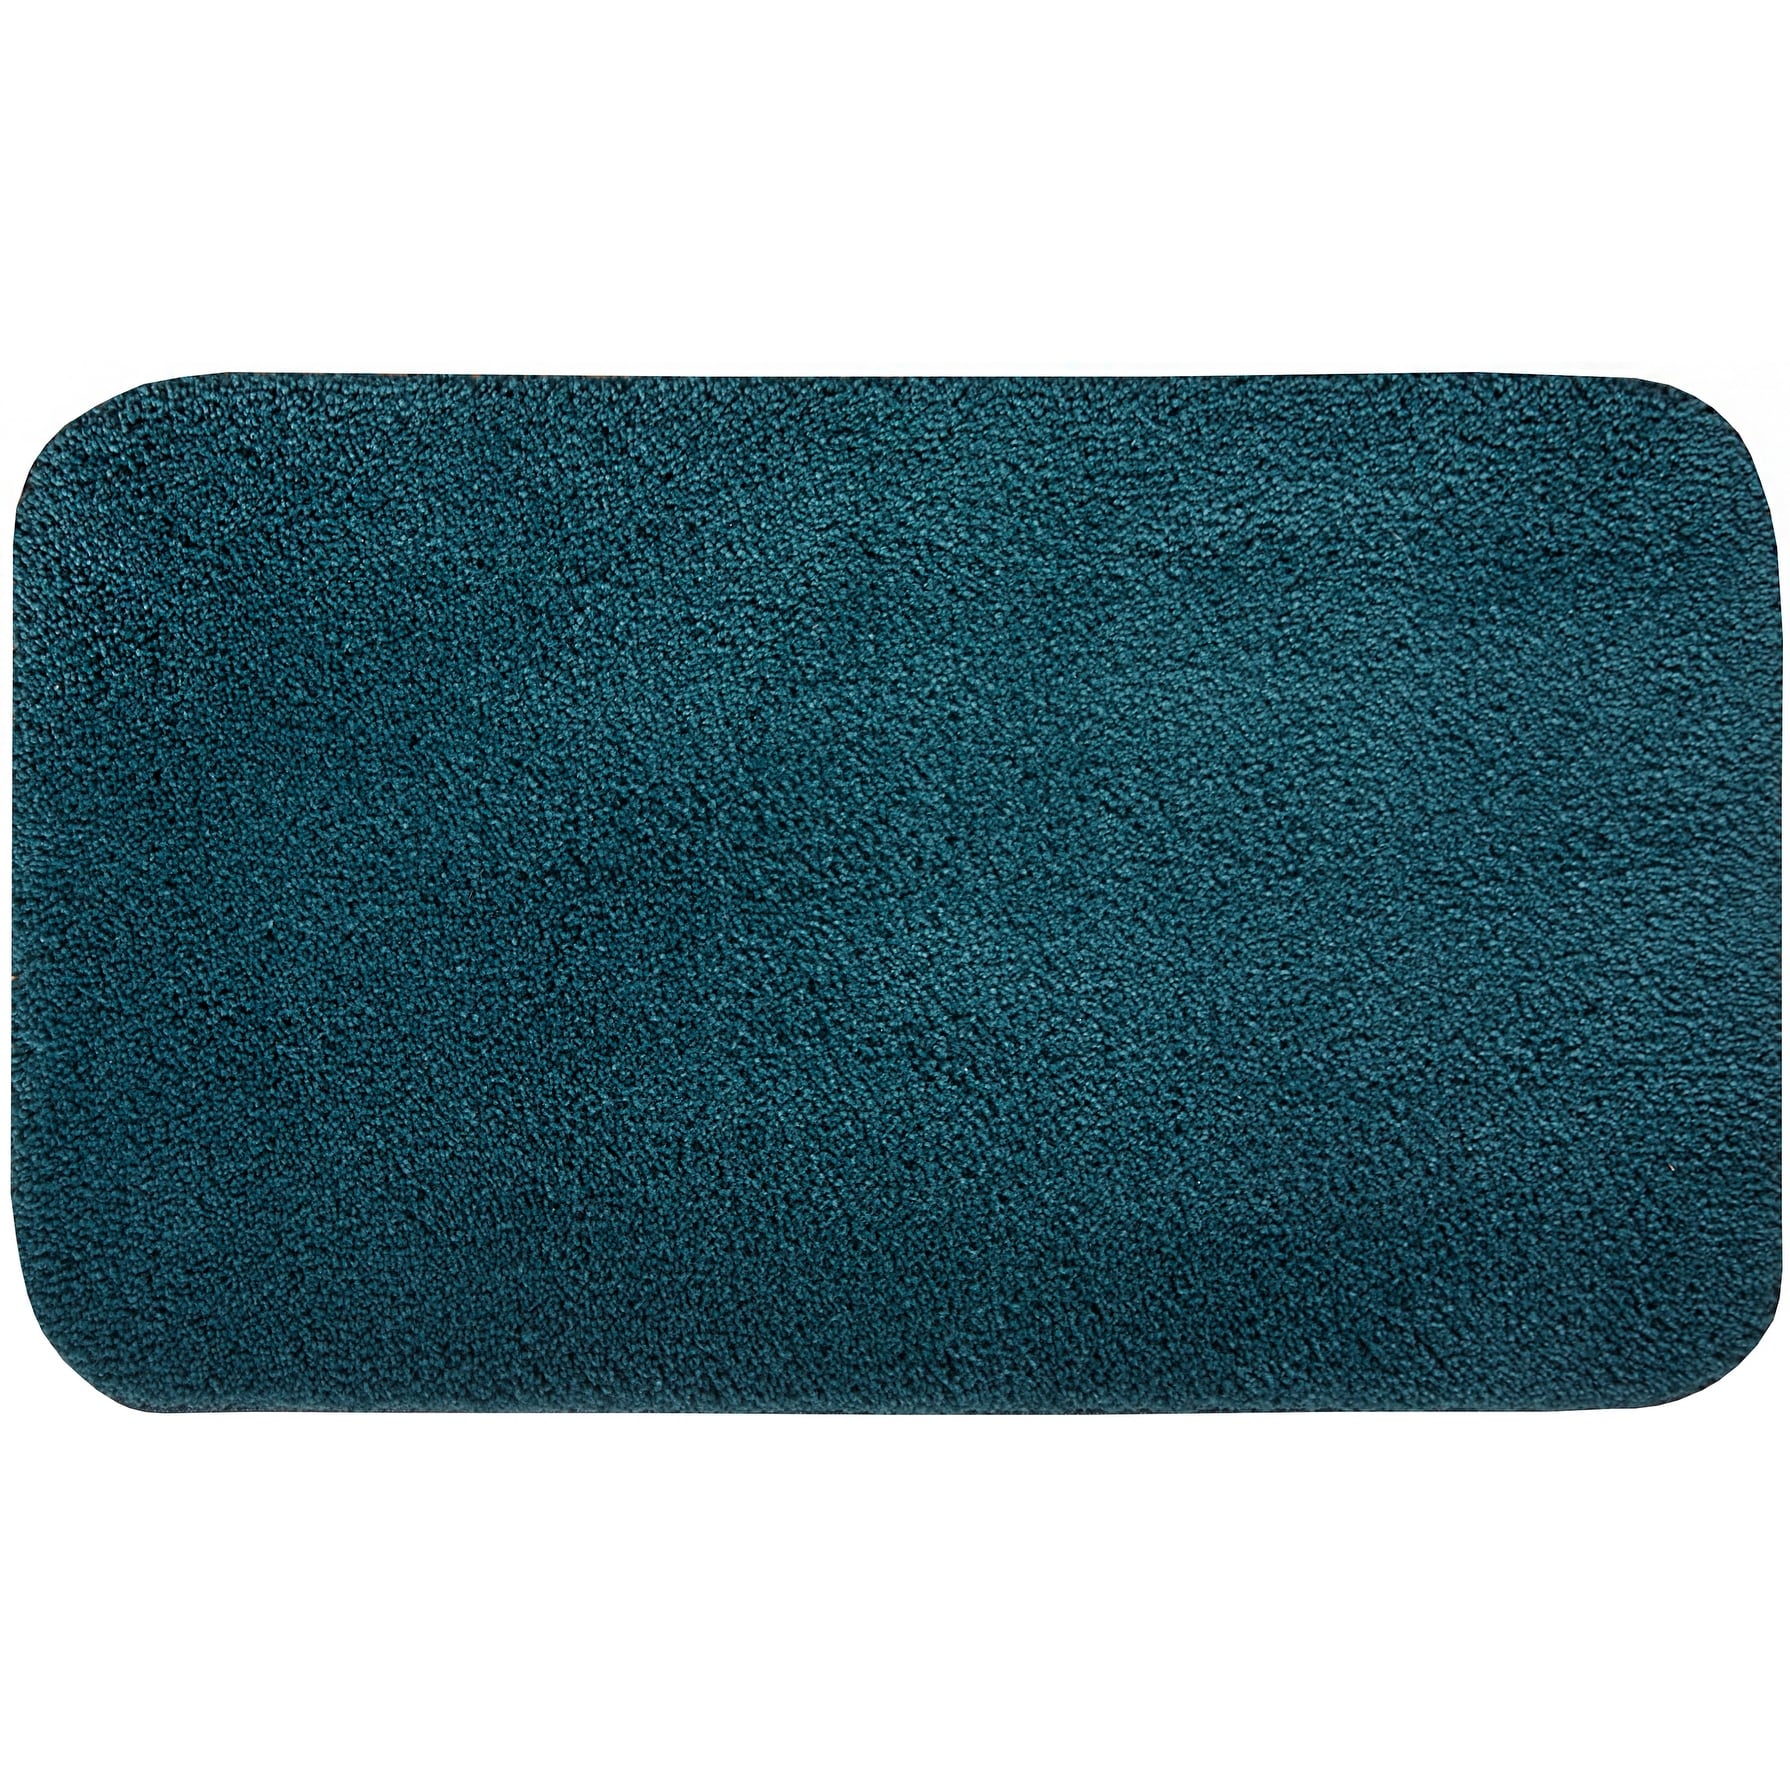 https://ak1.ostkcdn.com/images/products/is/images/direct/5f13f14bd8f3c73b2e5014c38ab6a472445e1b29/Mohawk-Pure-Perfection-Bath-Rug.jpg